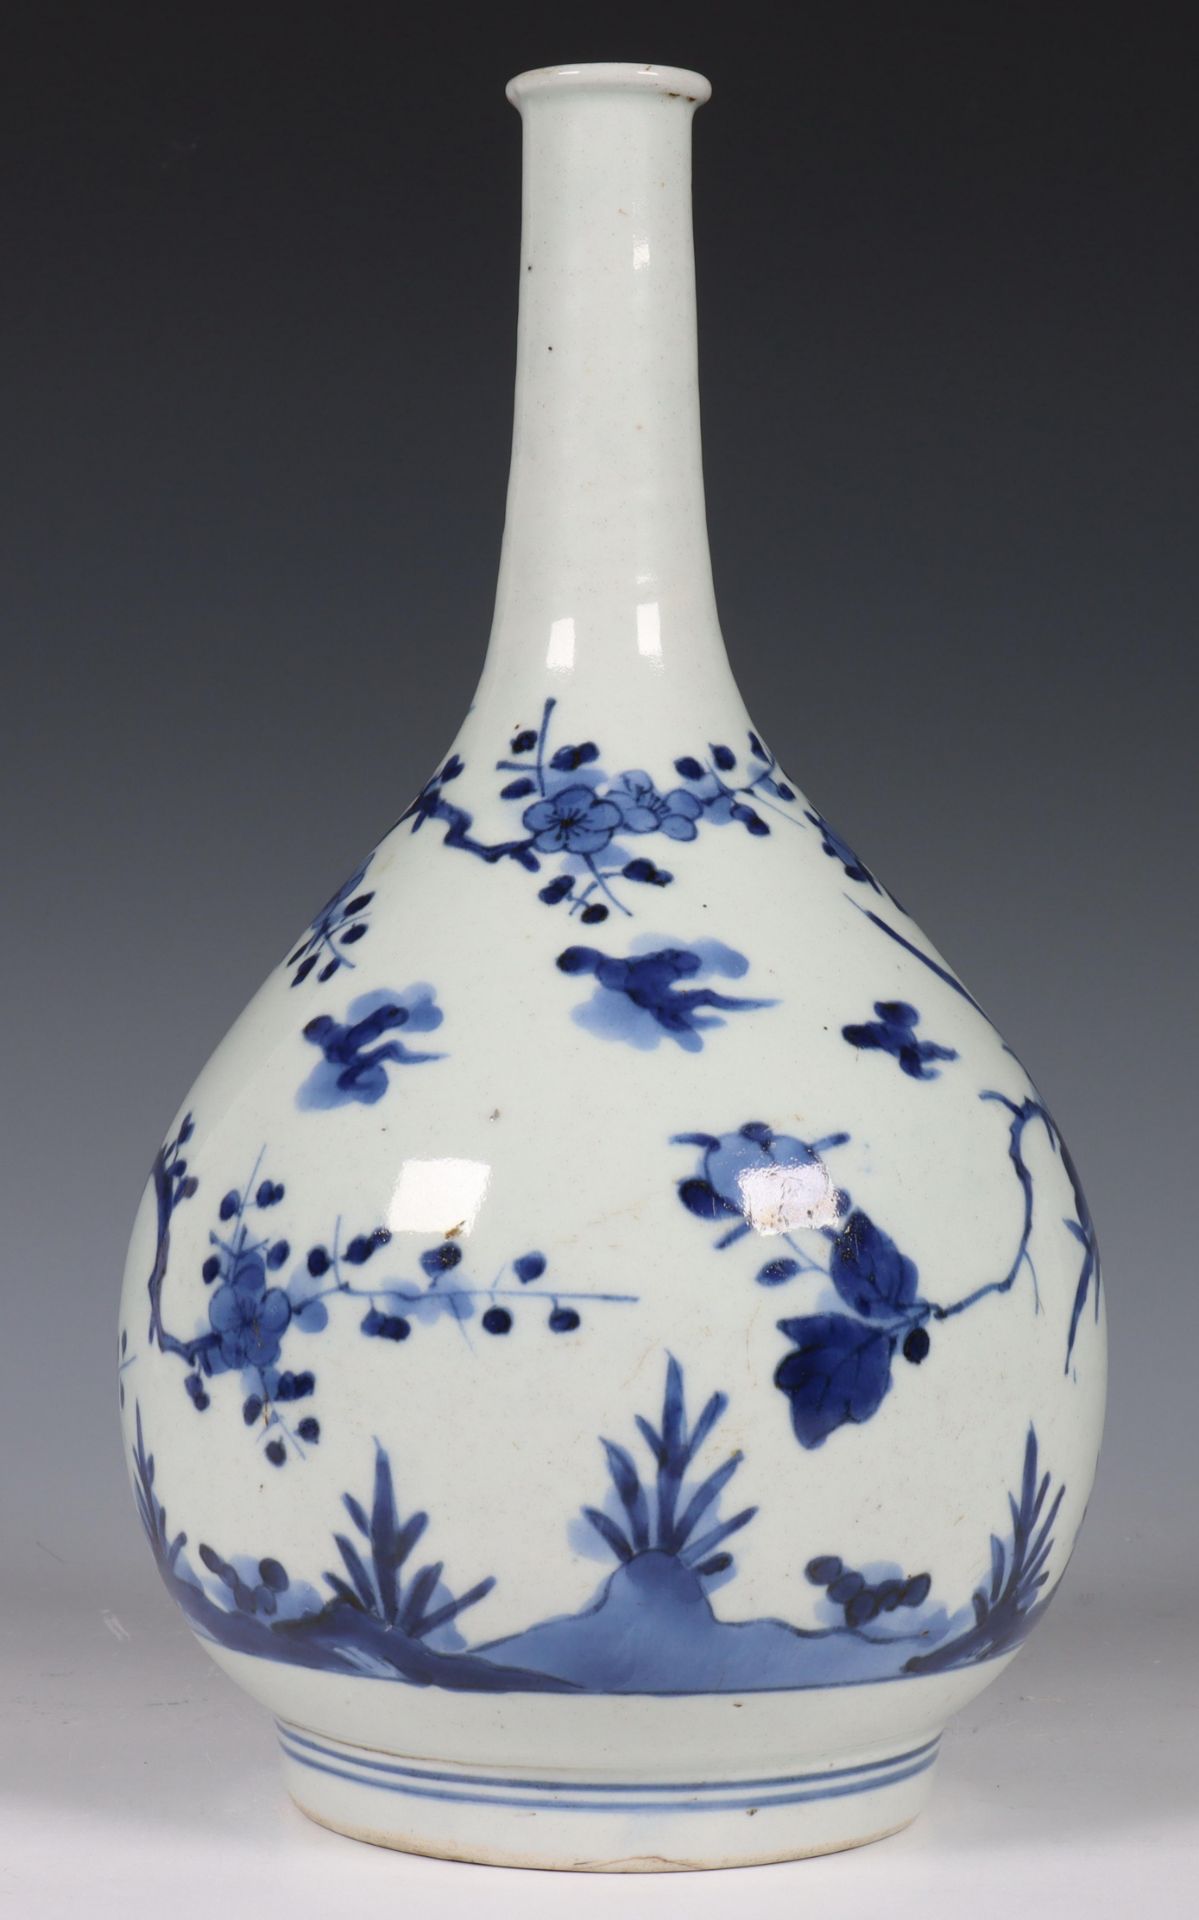 Japan, Arita blue and white porcelain bottle vase, Edo period, late 17th century, decorated with - Image 9 of 16